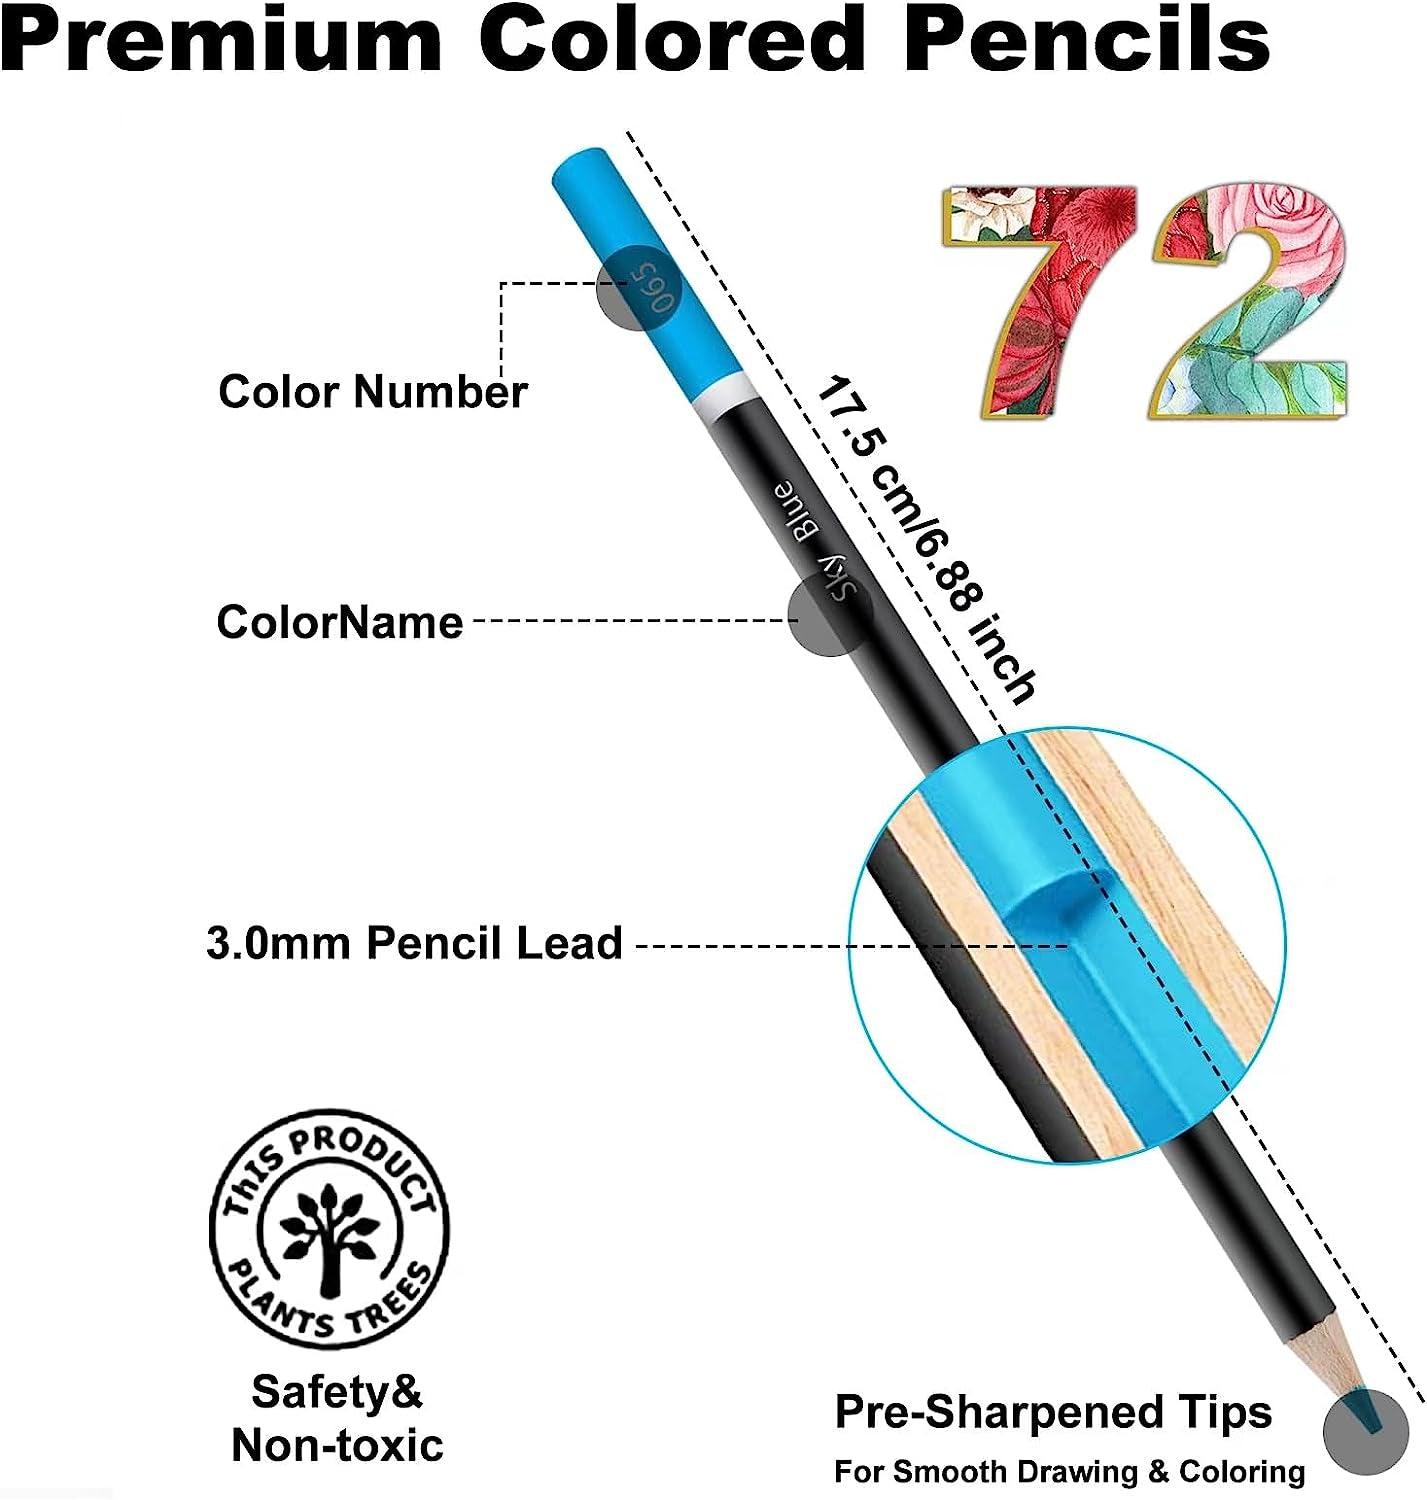 Colored Pencils for Adult Coloring Books, 72 Colored Professional Drawing Pencils, Art Supplies - WoodArtSupply